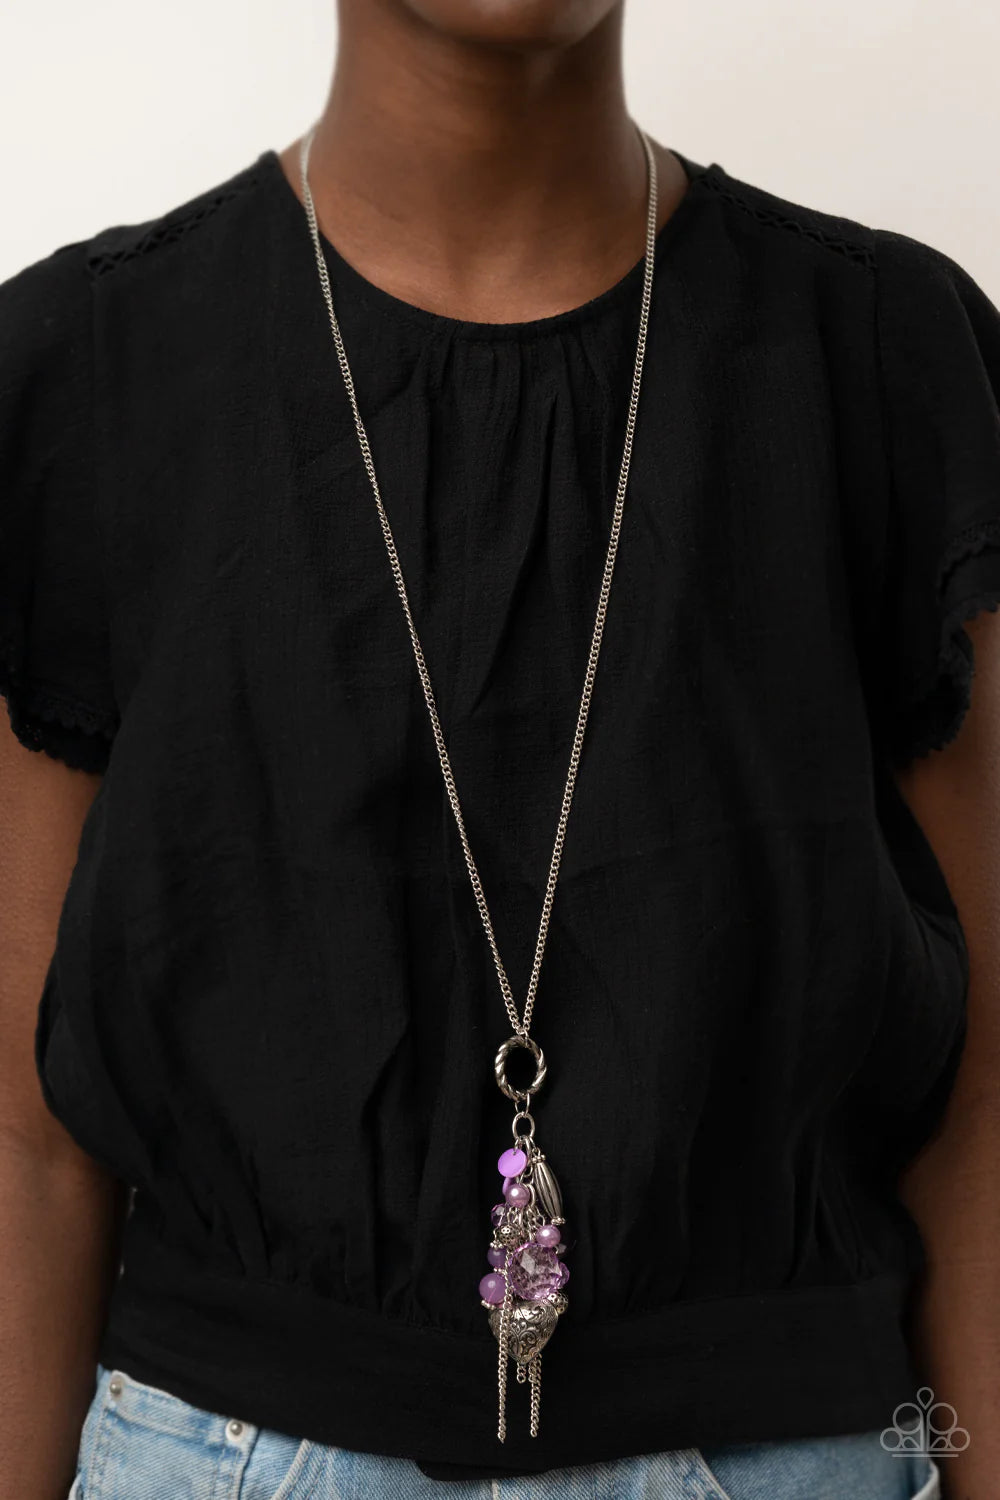 Paparazzi Accessories AMOR to Love - Purple Varying glassy, pearly, opaque, and shell-like finishes, a whimsical collection of crystal-like and classic Amethyst Orchid beads delicately cluster along a silver chain swinging from the bottom of a textured si